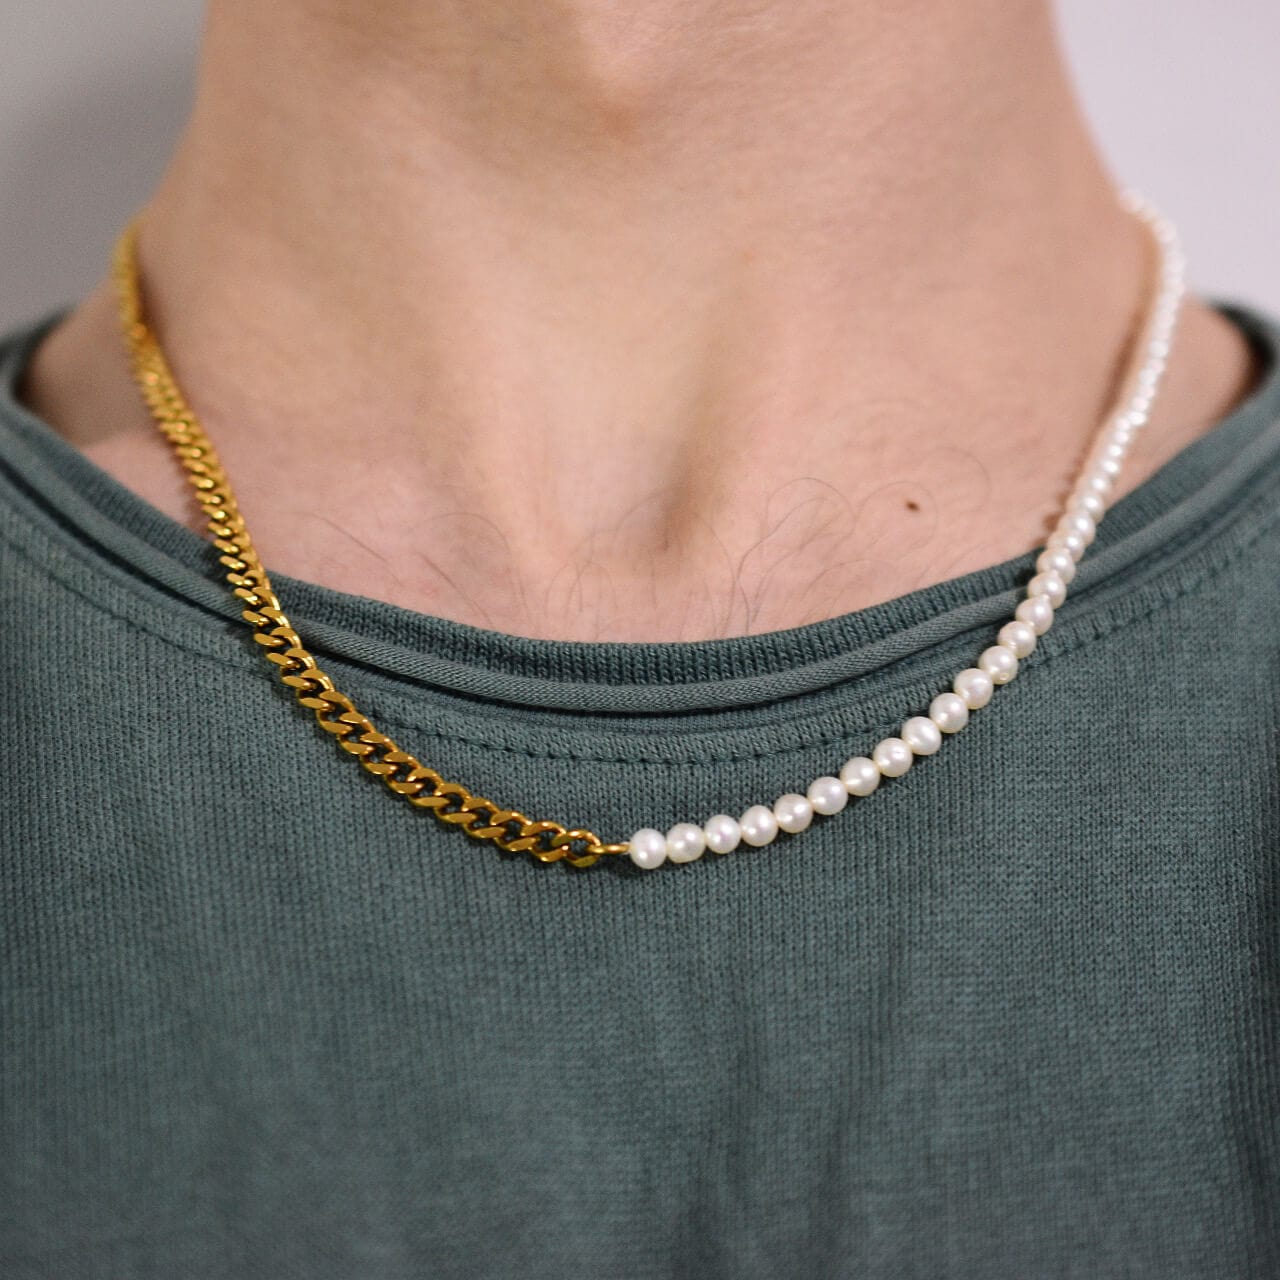 Buy Mens Necklace, Half Pearl Half Chain Necklace for Men, 18K Gold Pearl  Chain, Mens Pearl Silver Chain Mens Jewelry Gifts by Twistedpendant Online  in India - Etsy